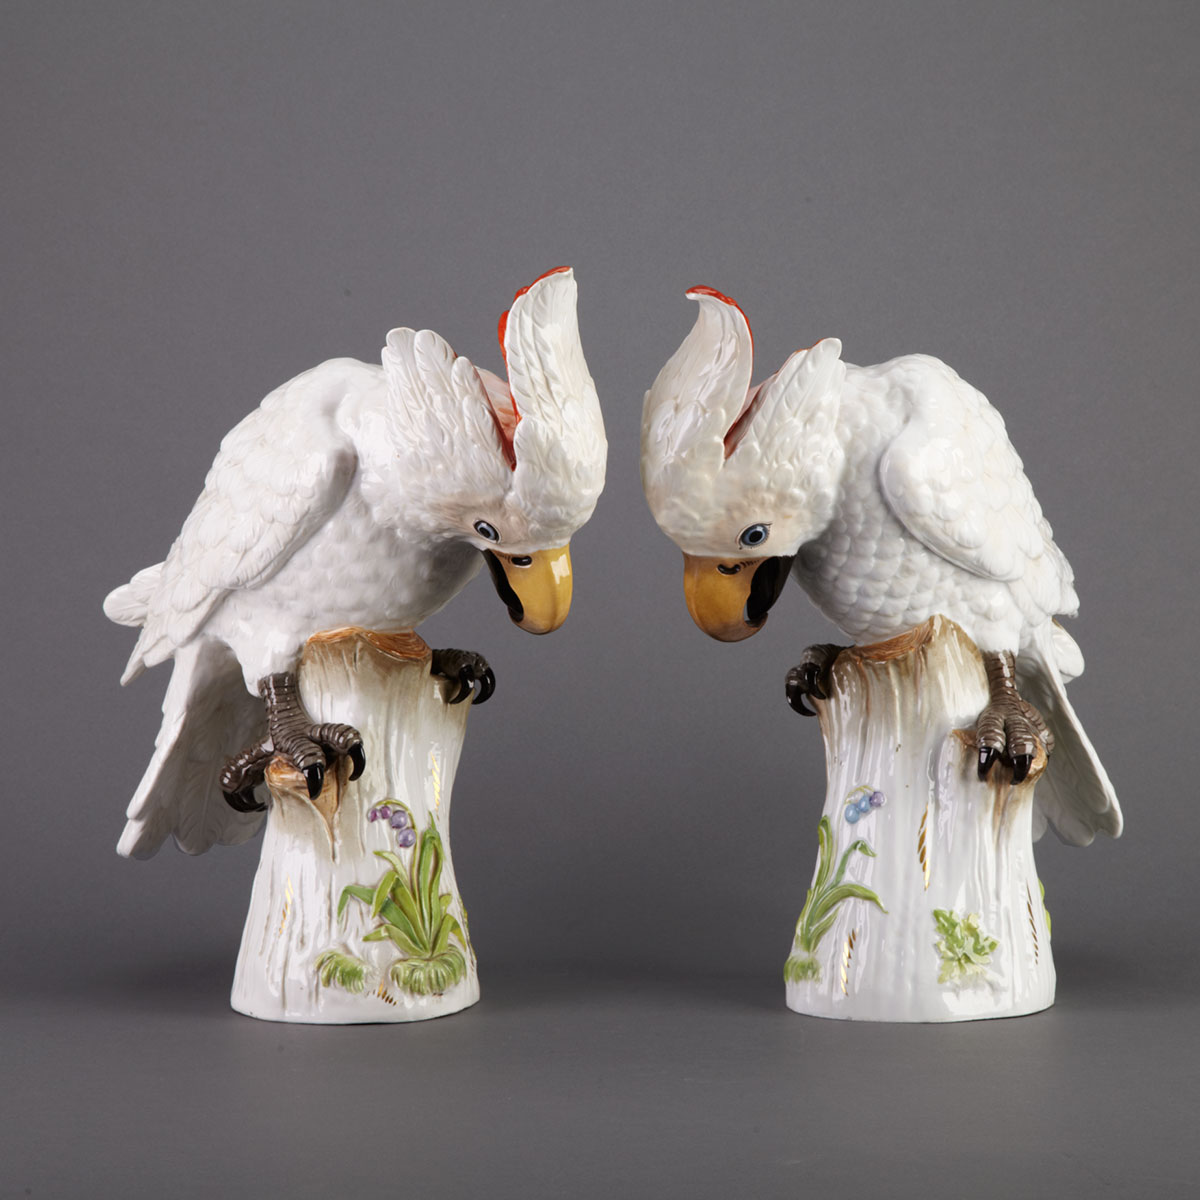 Pair of Meissen Models of Salmon-Crested